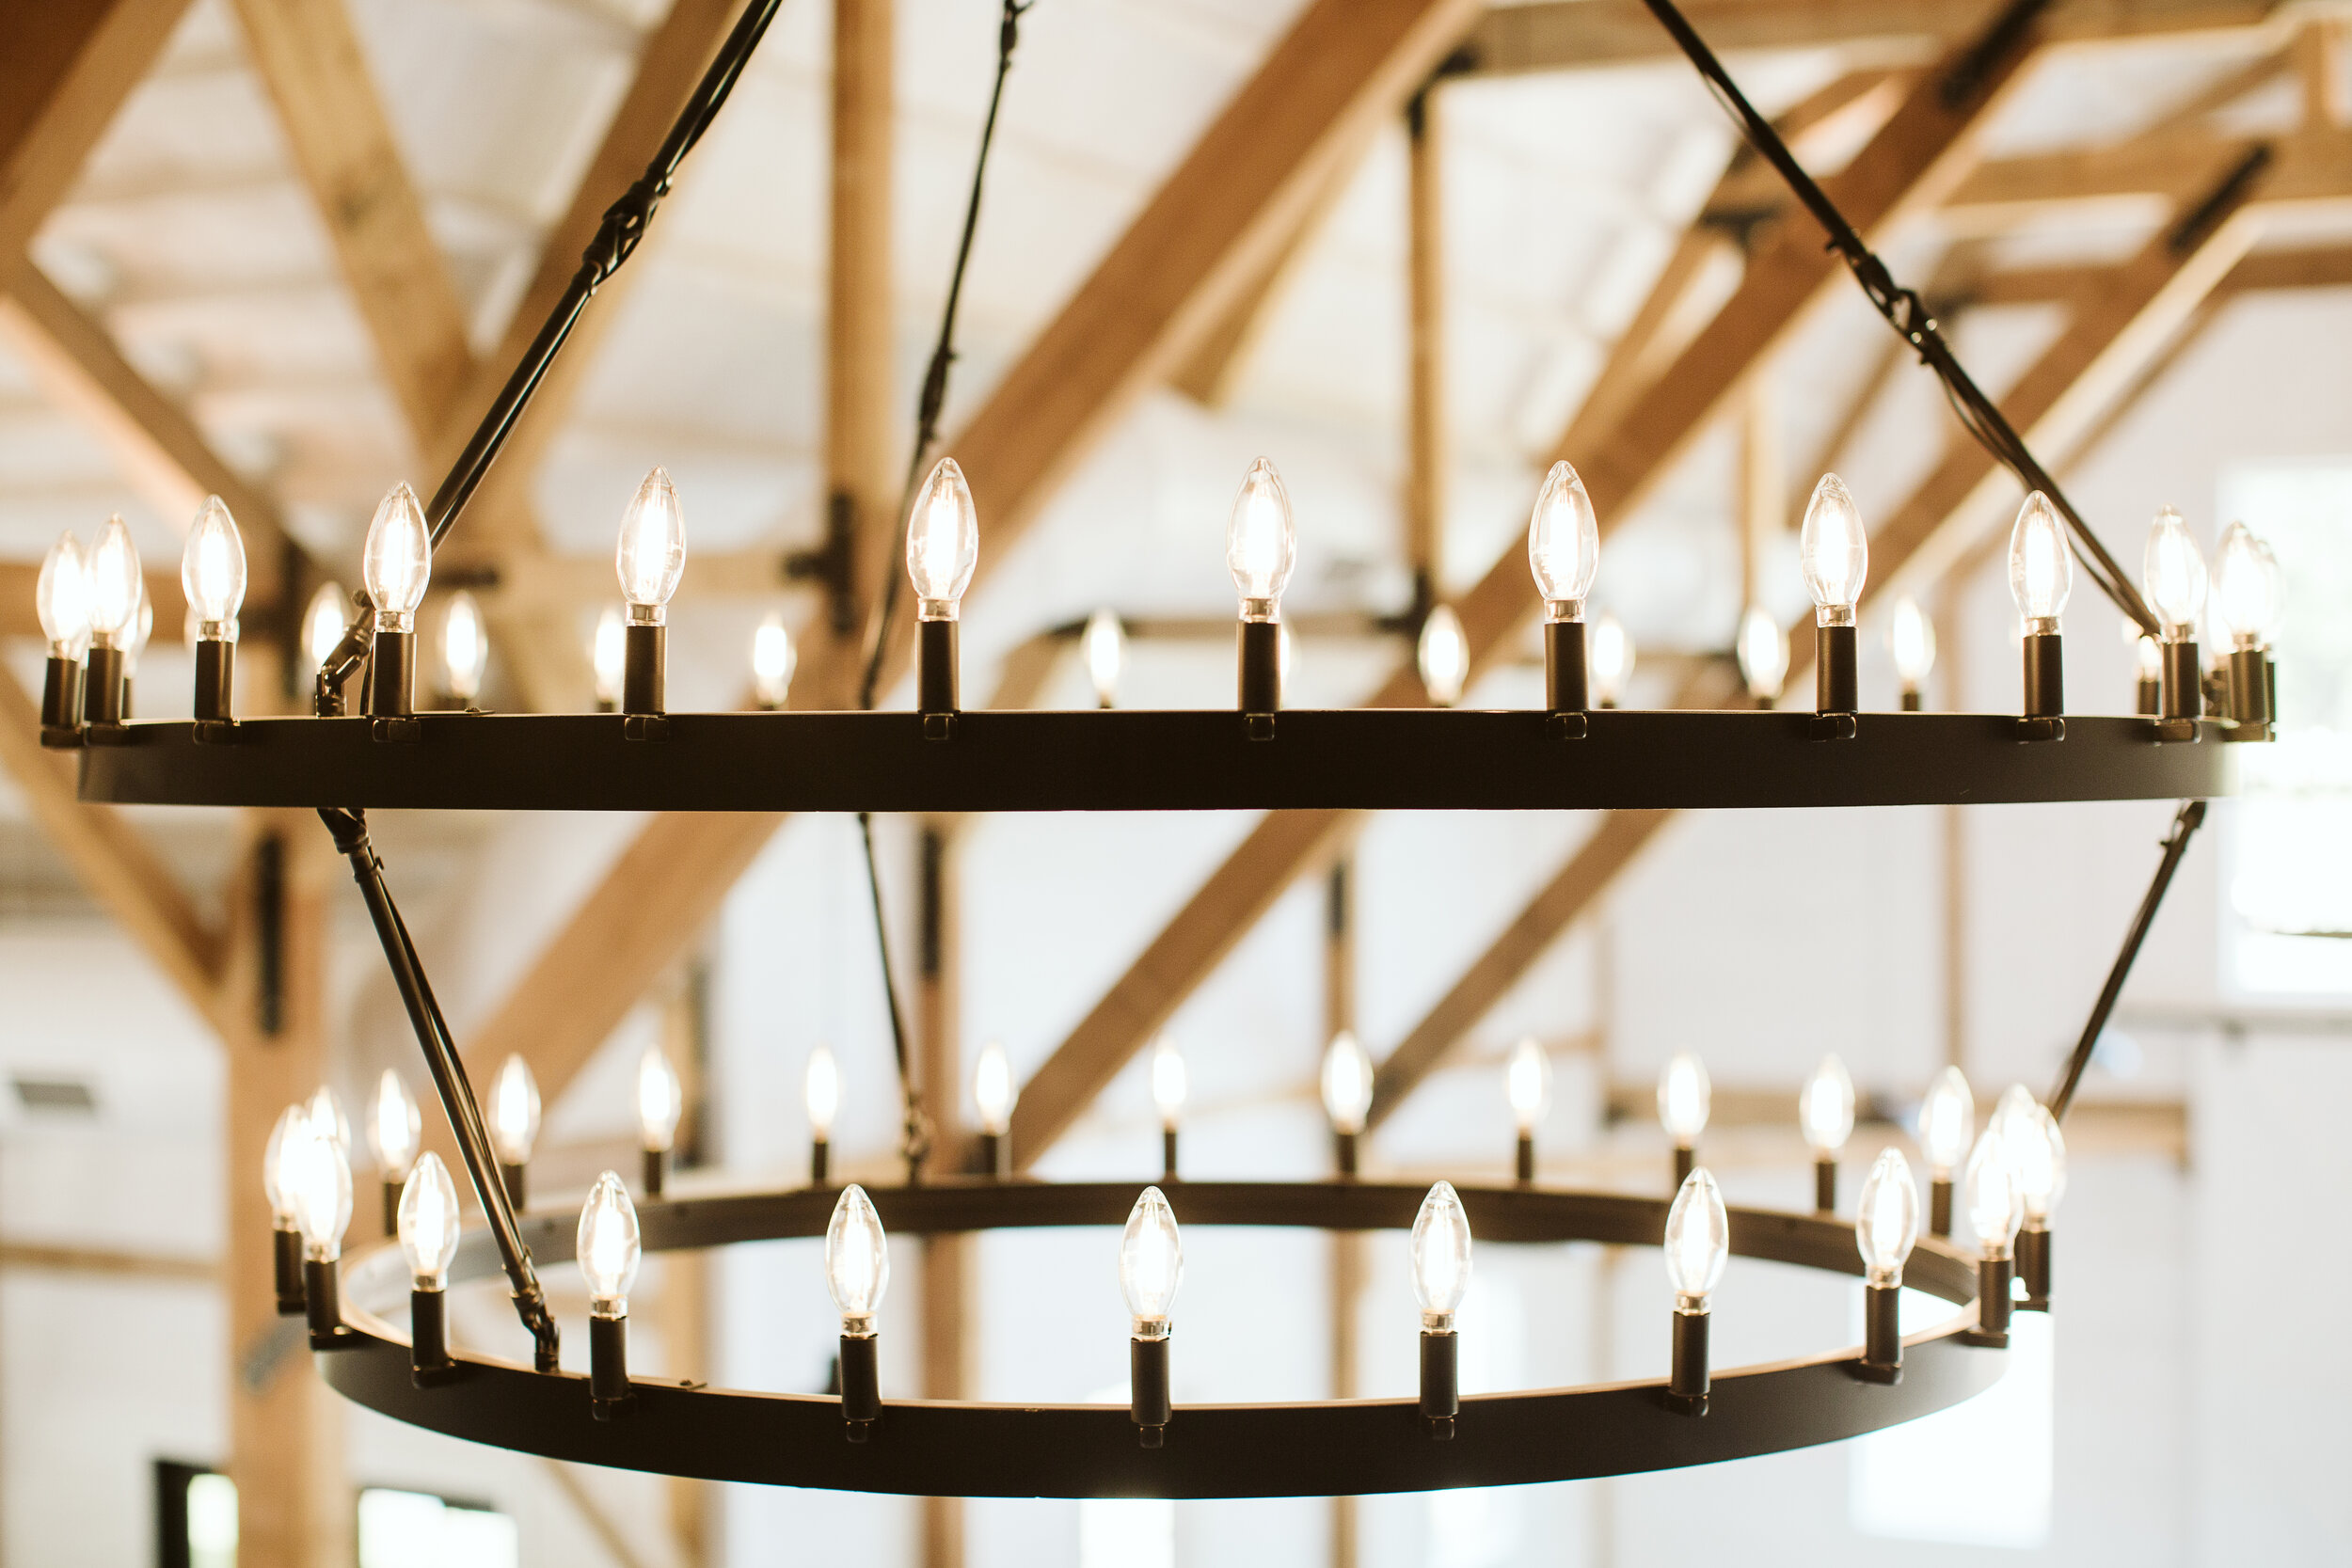  [PHOTO] Close-up of Gambrel Room chandeliers with candle lights 